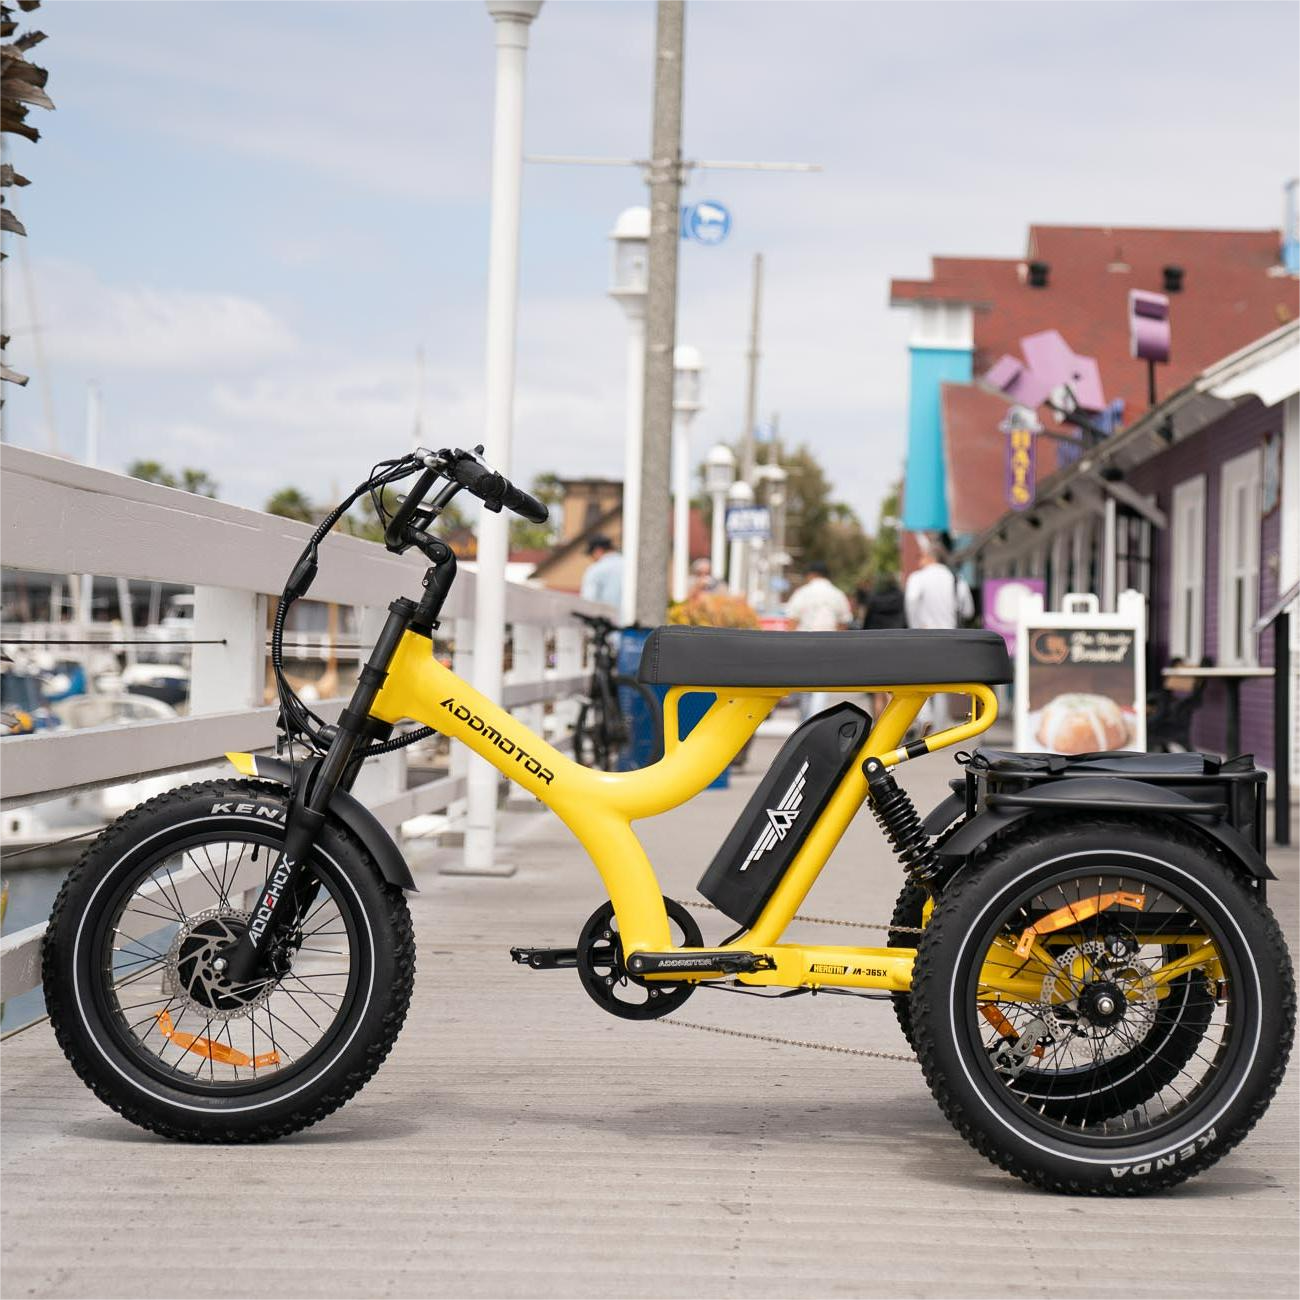 The Addmotor M-365x Electric Trike: A Unique Blend of Comfort, Performance, and Style